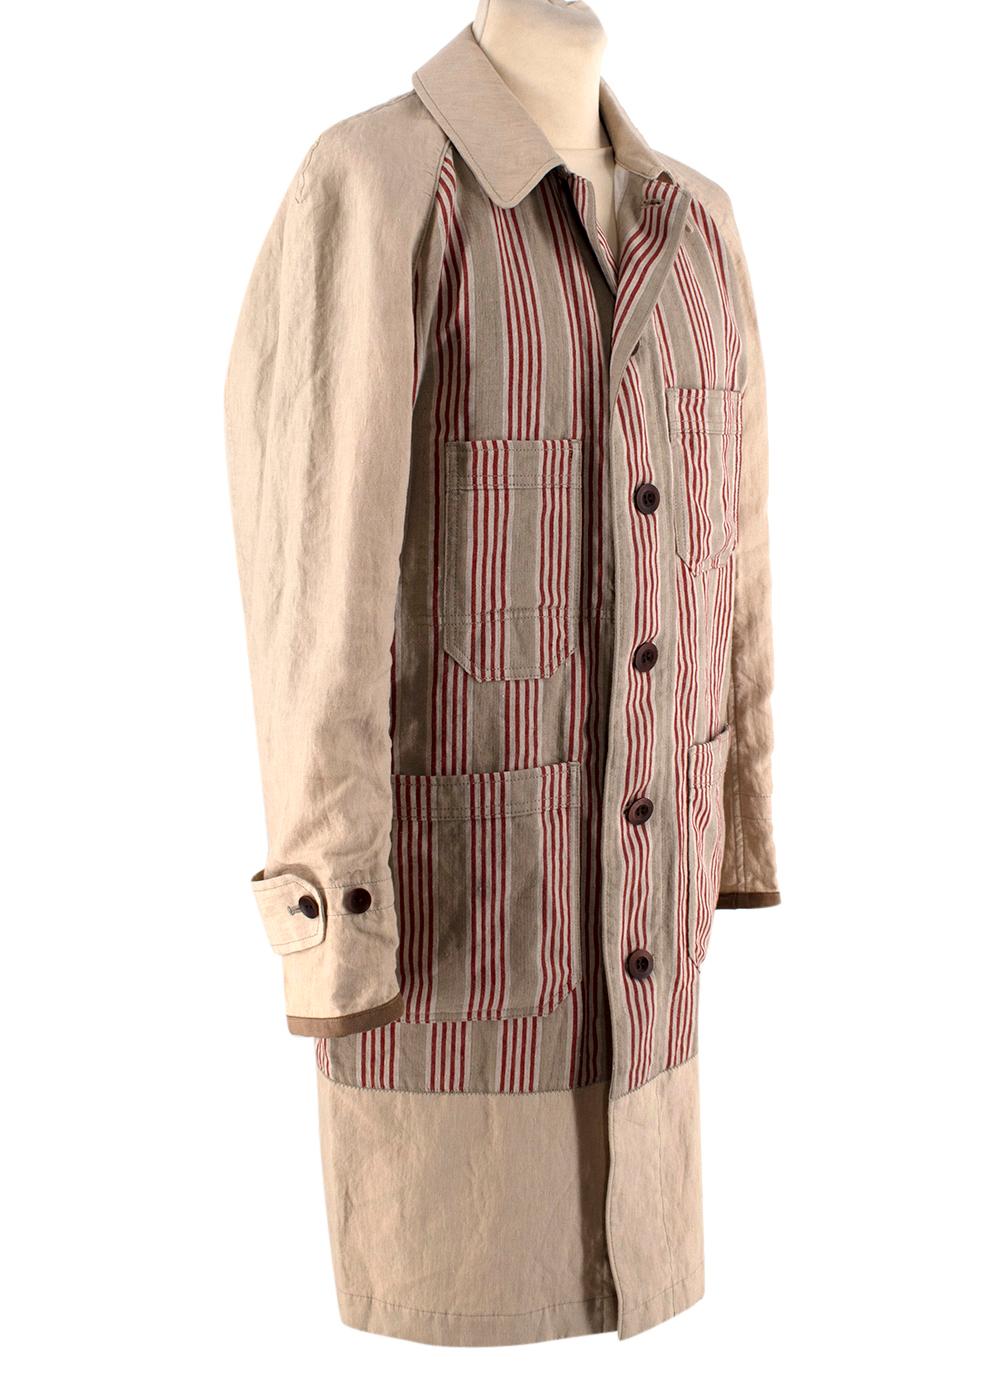 Junya Watanabe Comme Des Garcons Beige Linen Striped Coat 

- Spread collar with a button closure at the front
- Linen herringbone panel striped in red, and tones of beige at the front
- Patch pockets at chest and waist
- Adjustable buttoned tab and